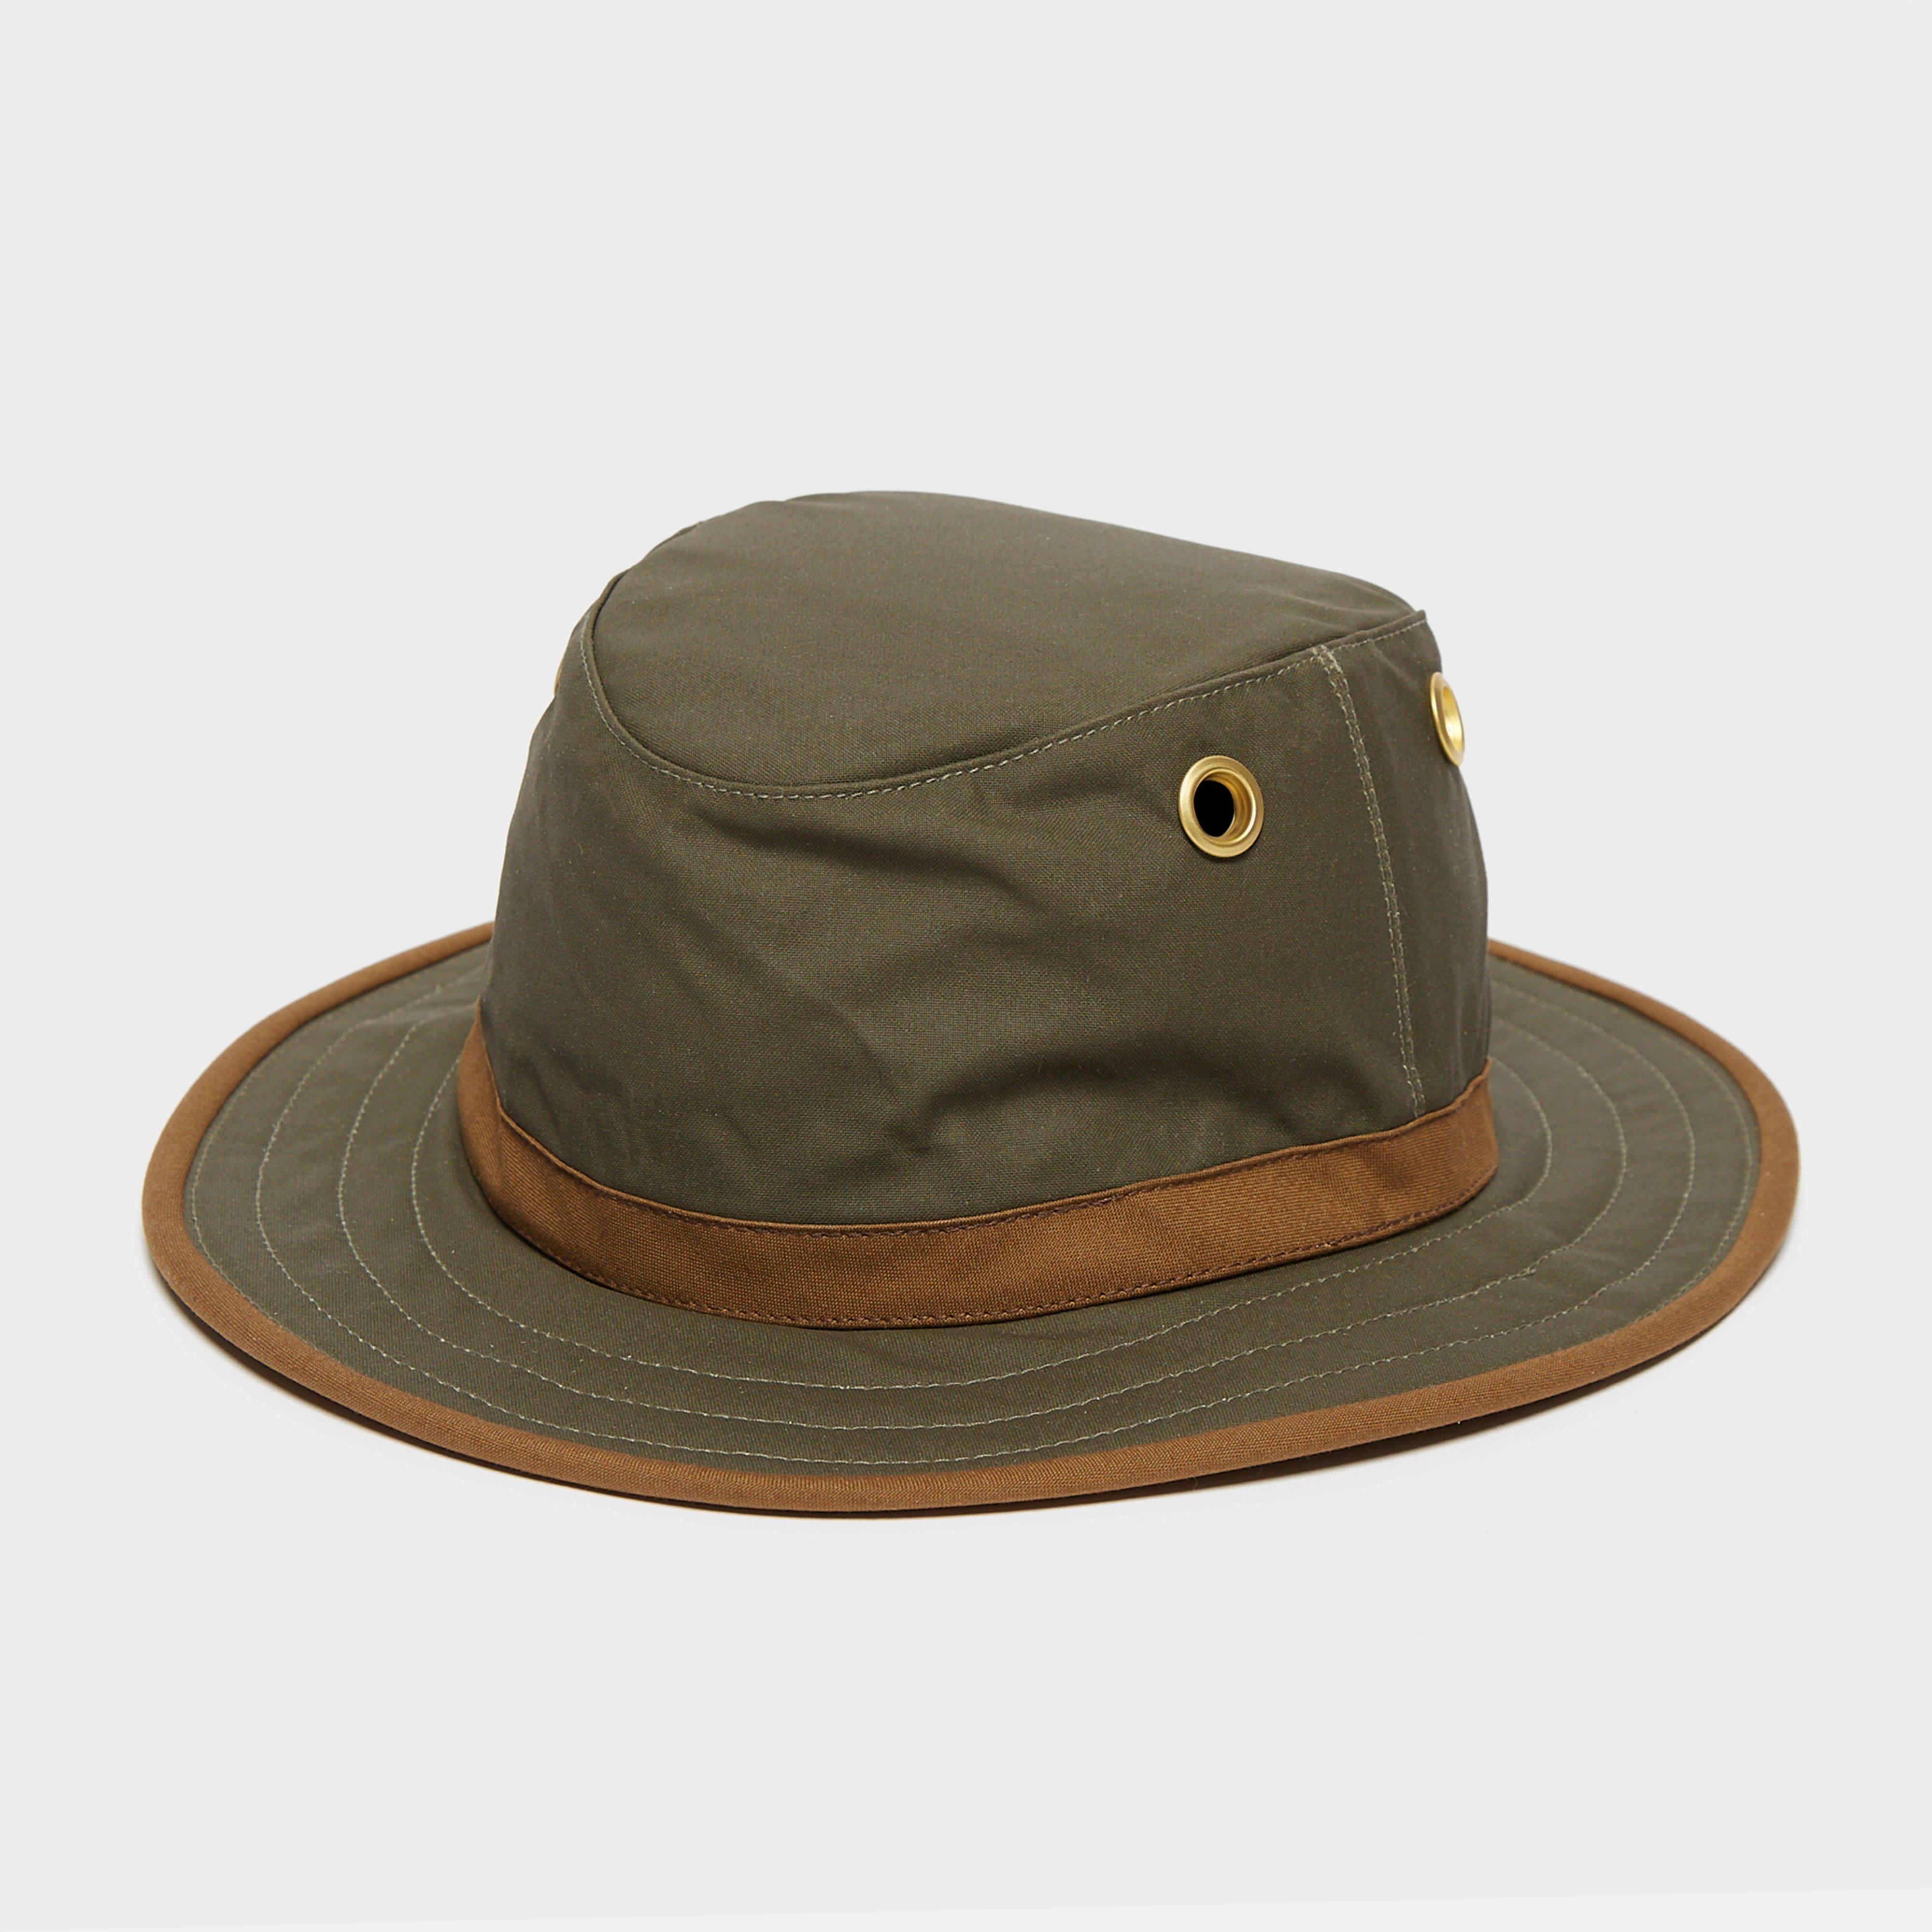  Tilley Outback Waxed Cotton Hat, Khaki